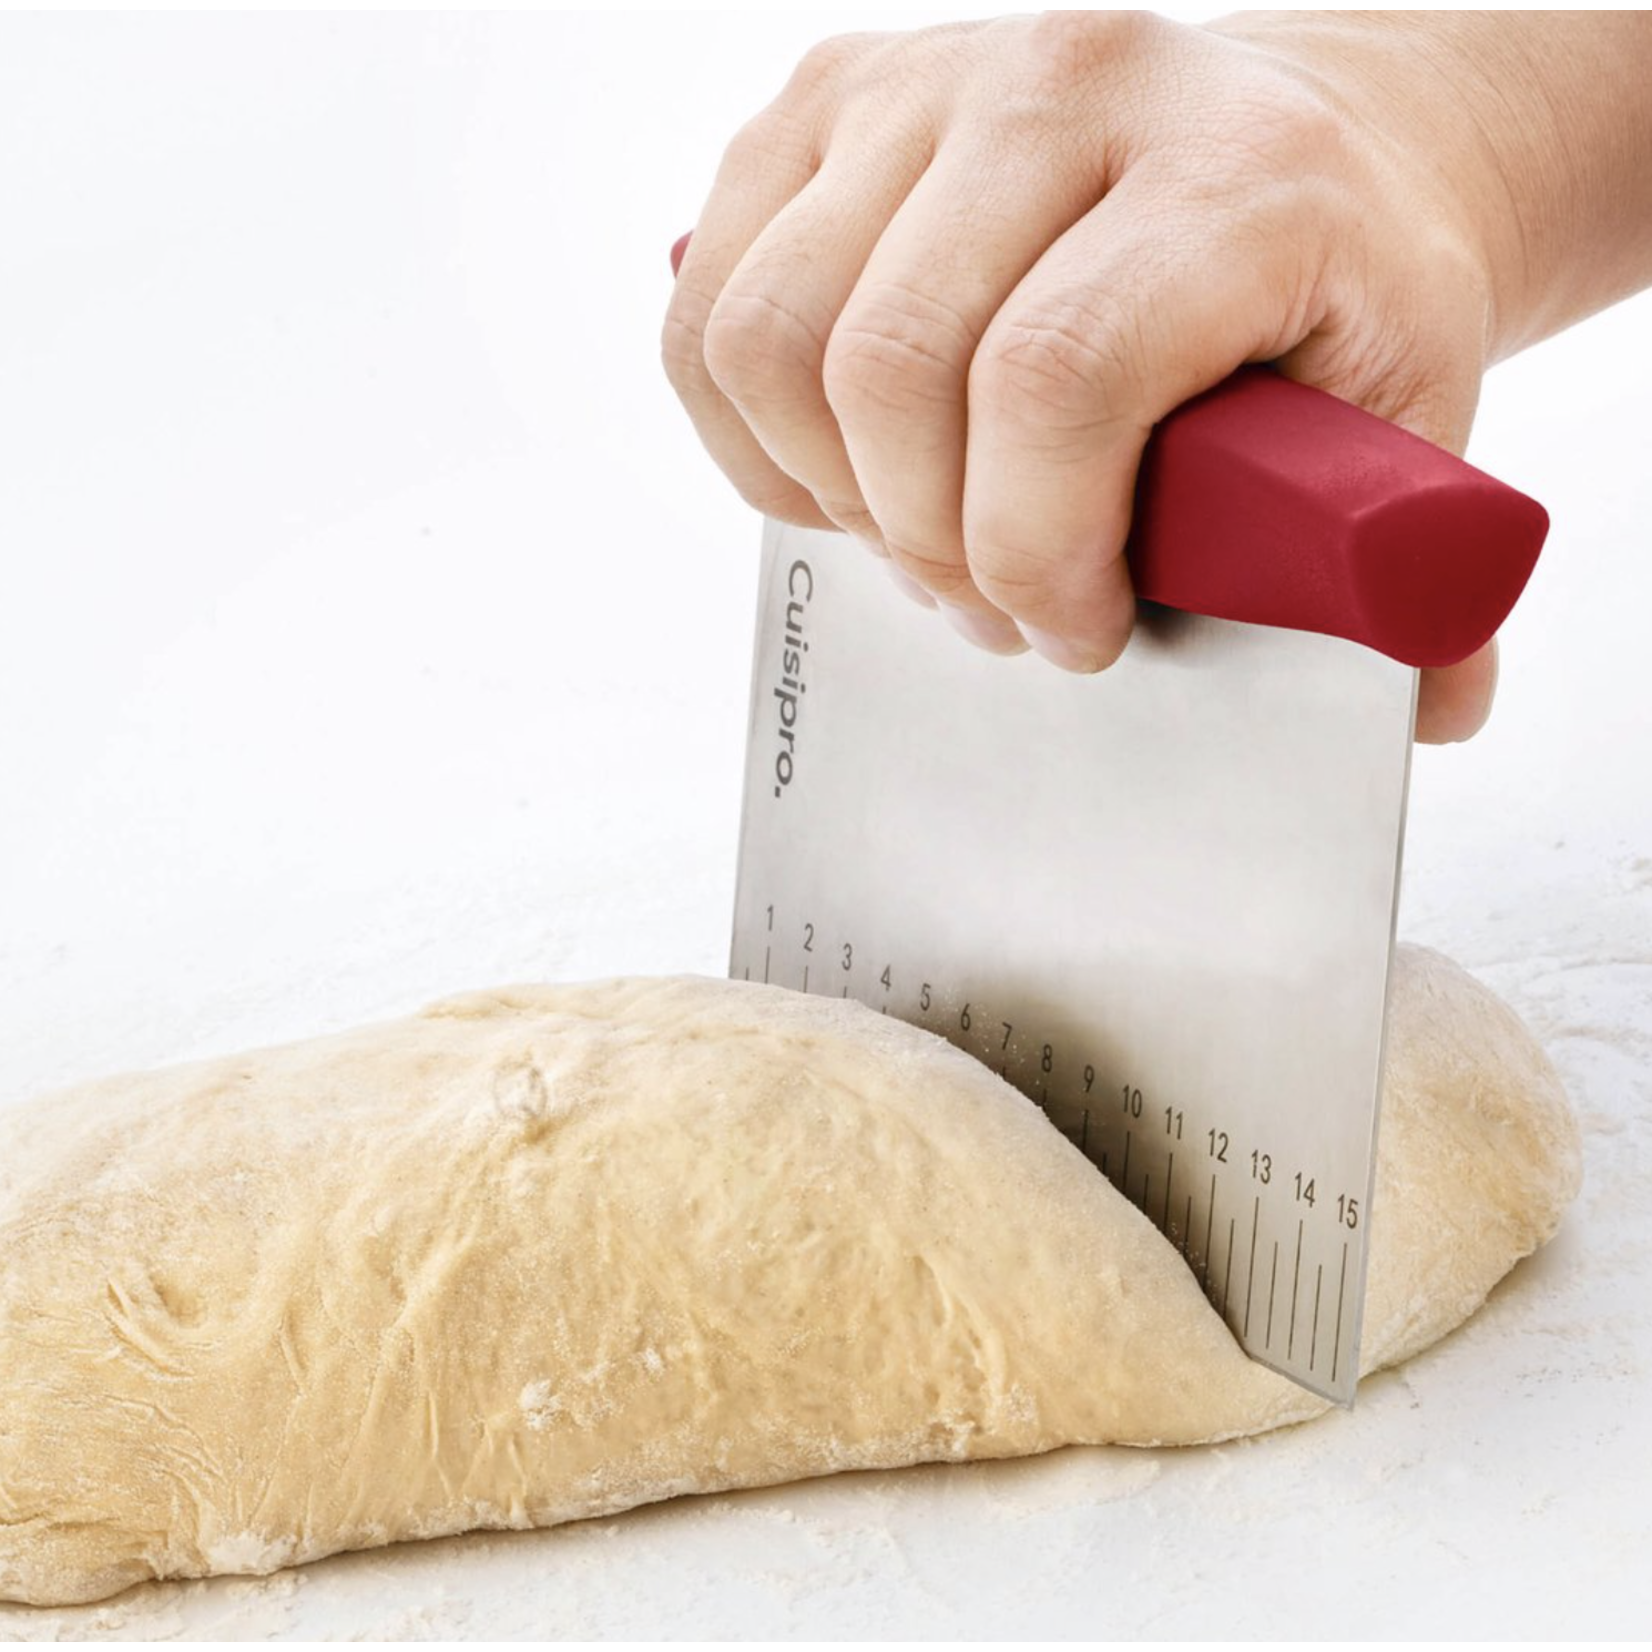 CUISIPRO CUISIPRO Dough Cutter 1.25” - Red